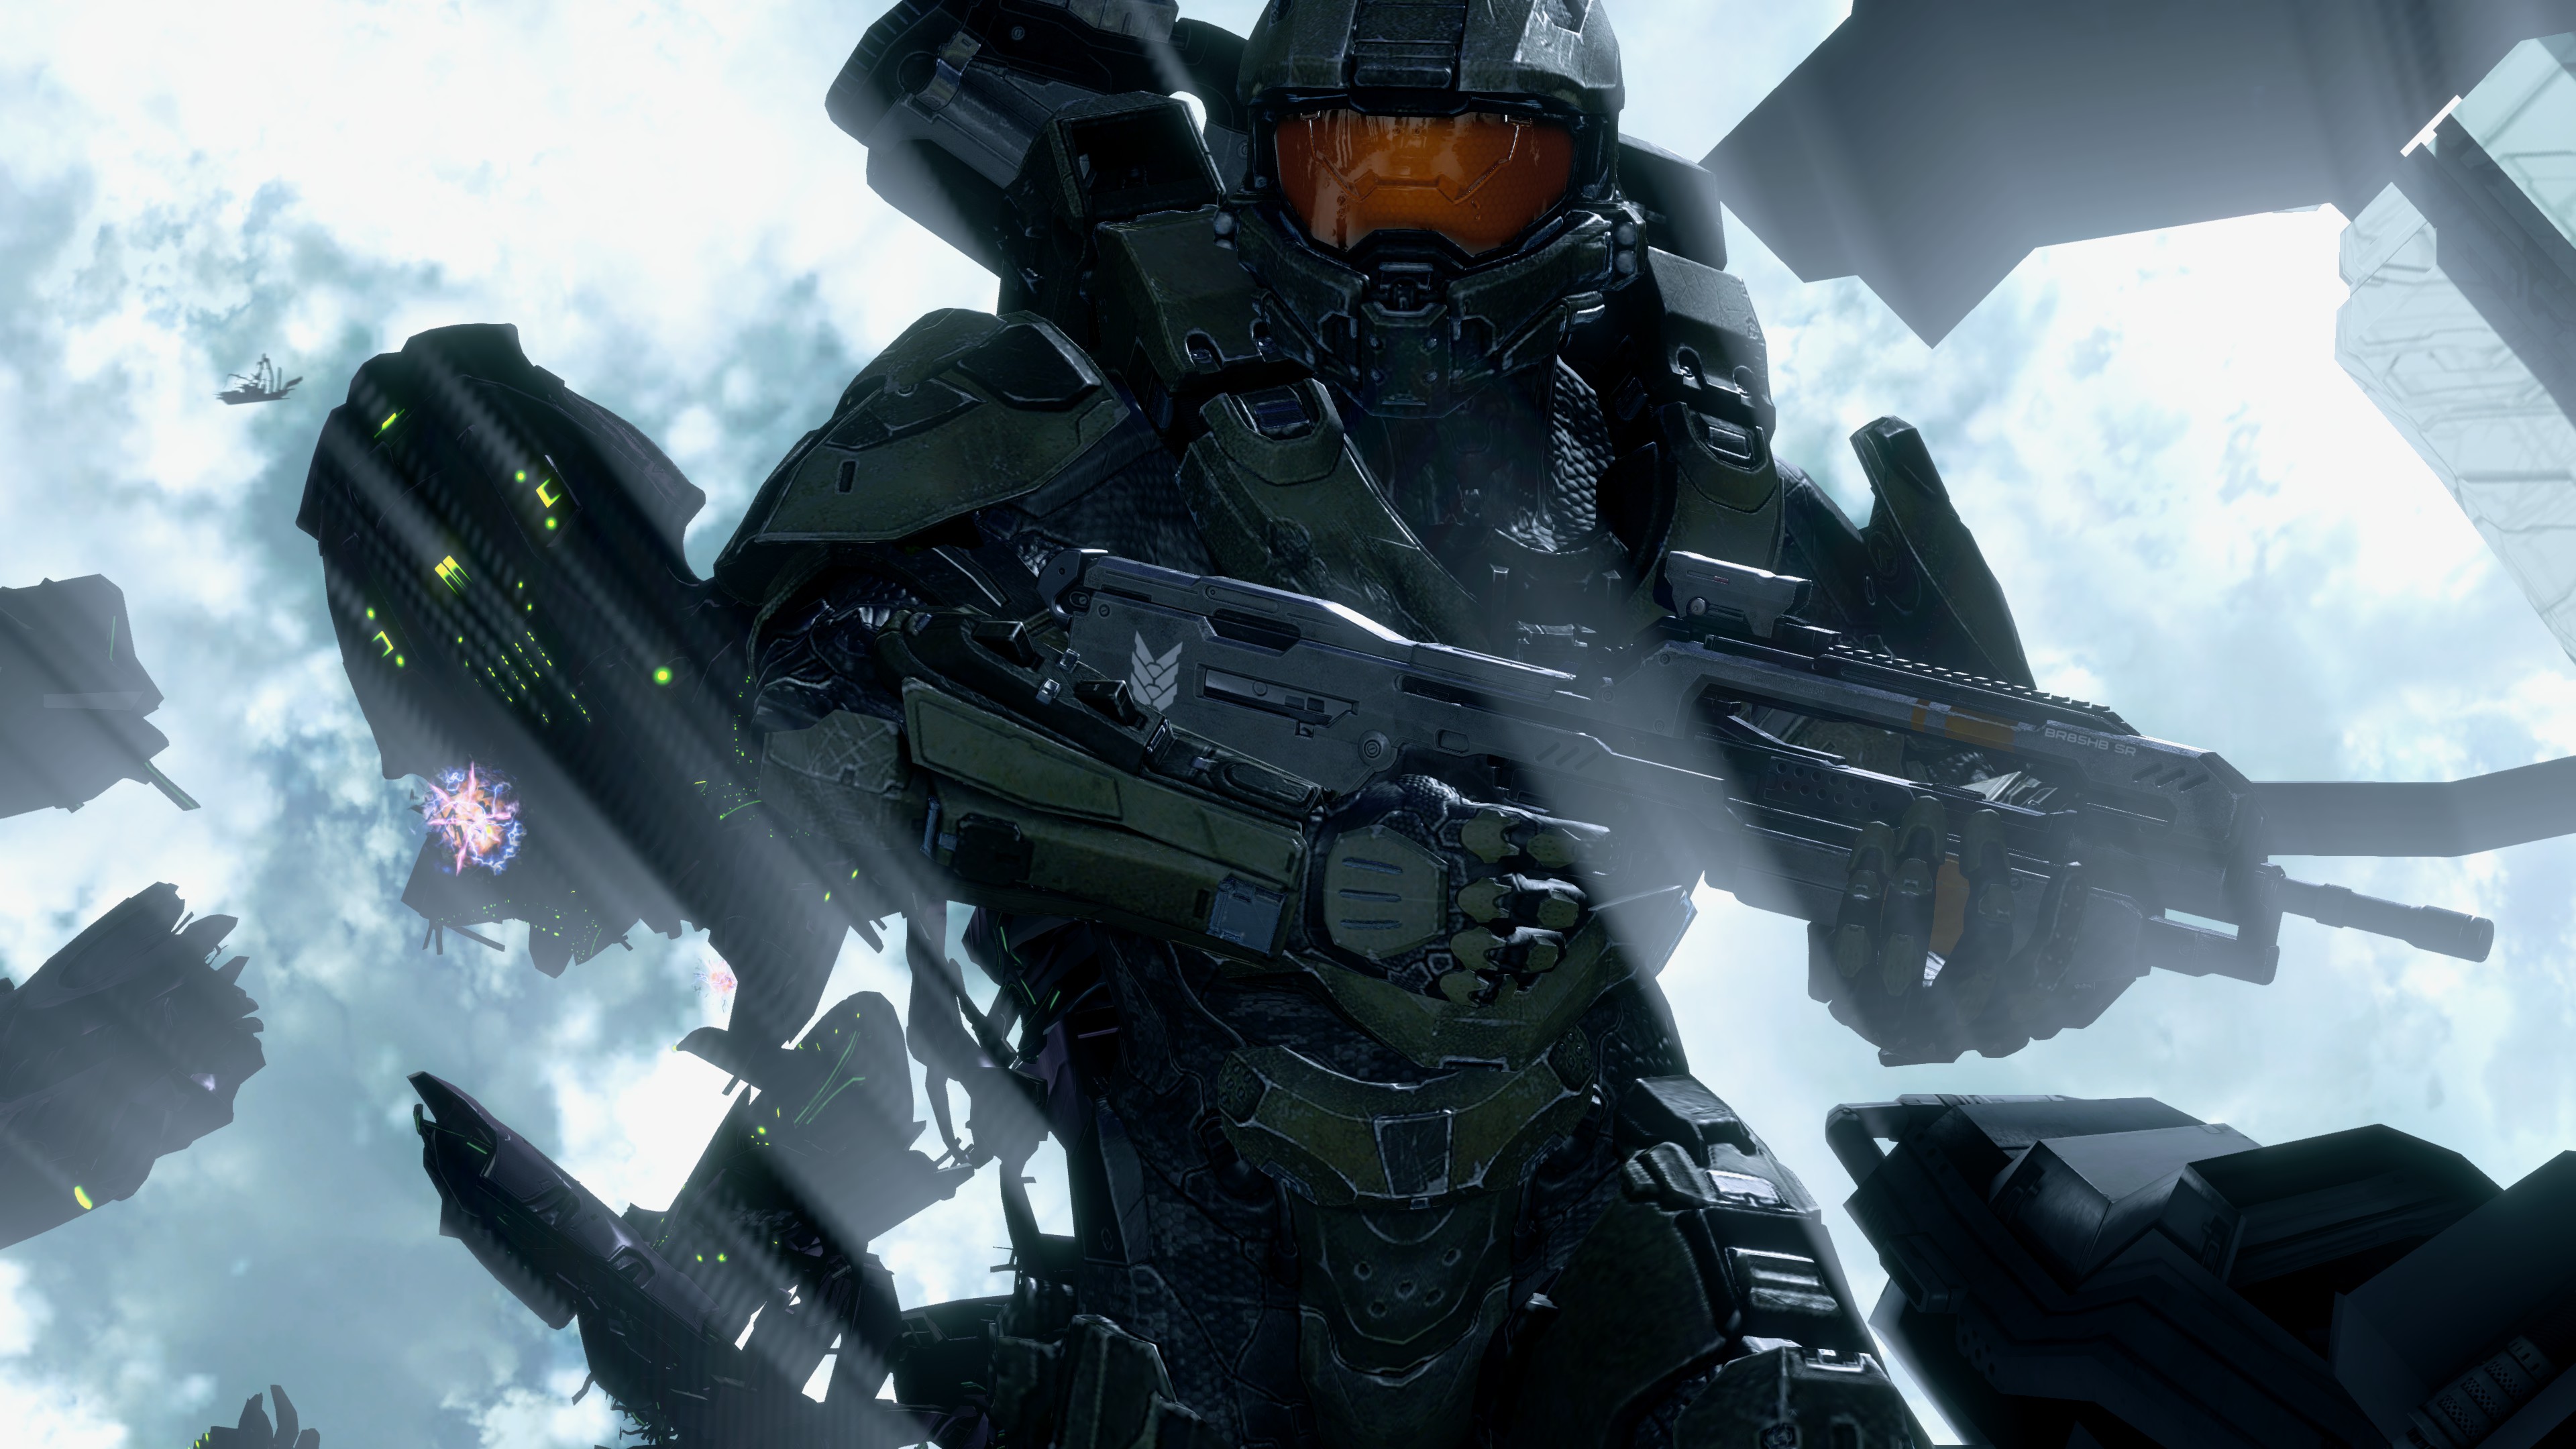 Halo 4's first gorgeous gameplay, live action trailer from E3 2012